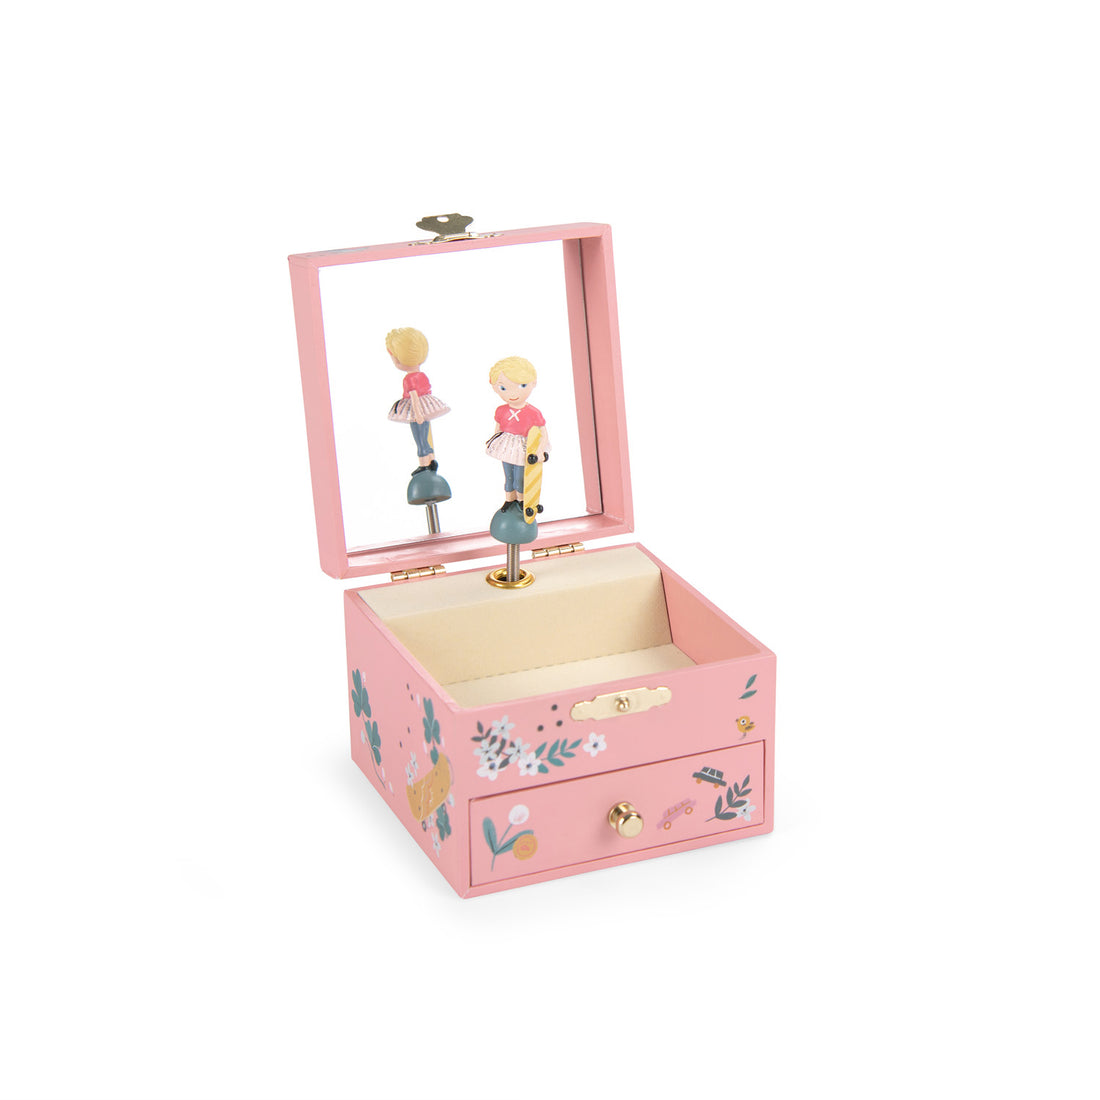 moulin-roty-les-parisiennes-musical-jewellery-box-moul-642105